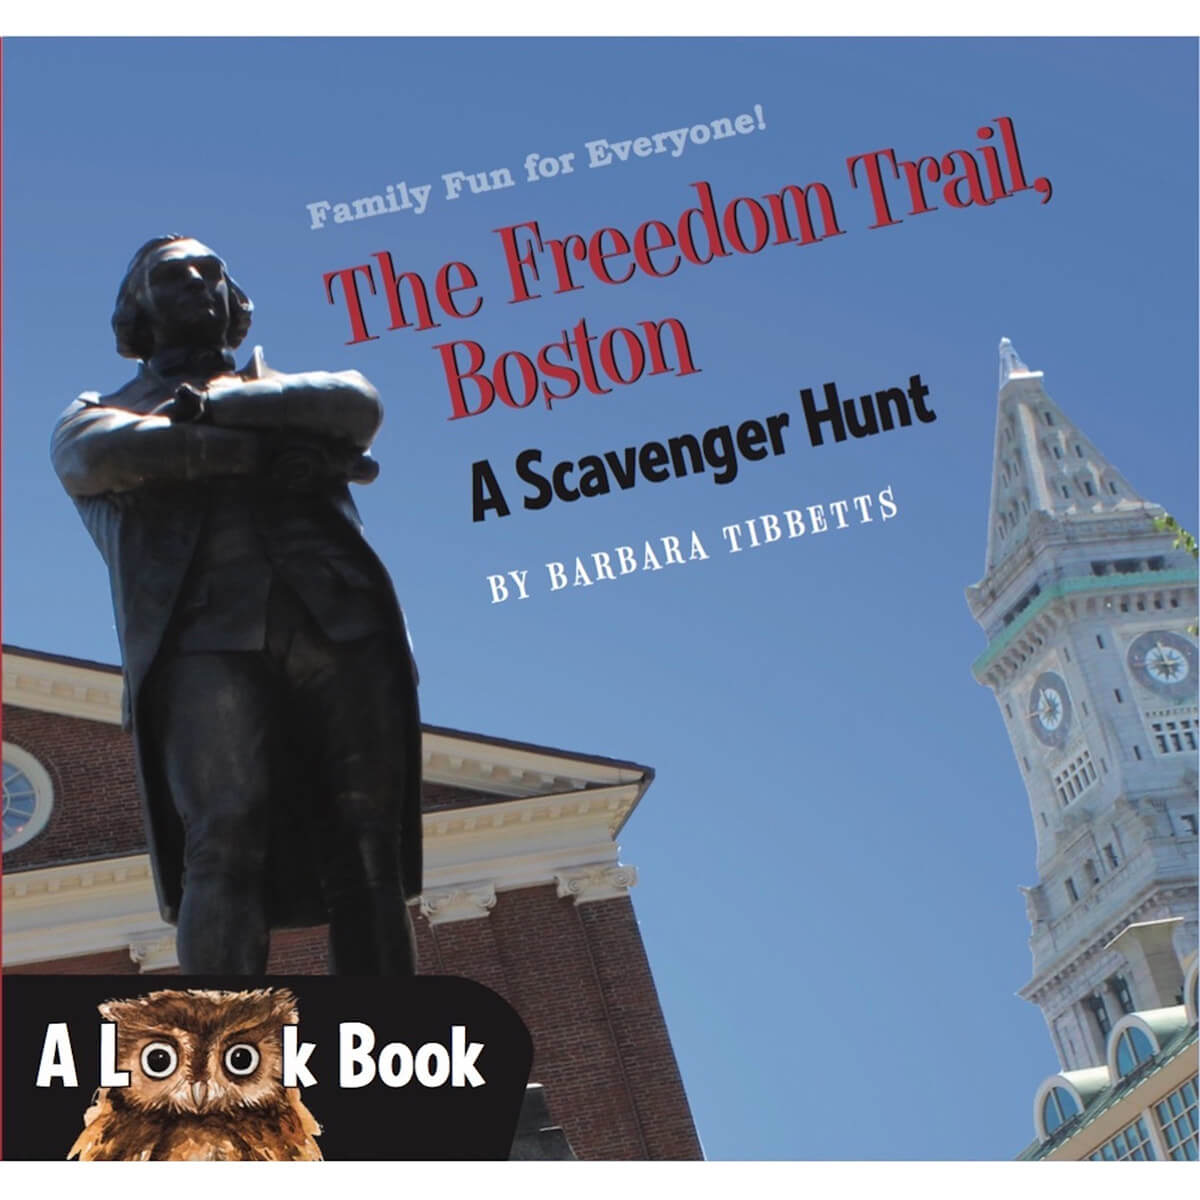 Look Book: A Scavenger Hunt - The Feedom Trail, Boston